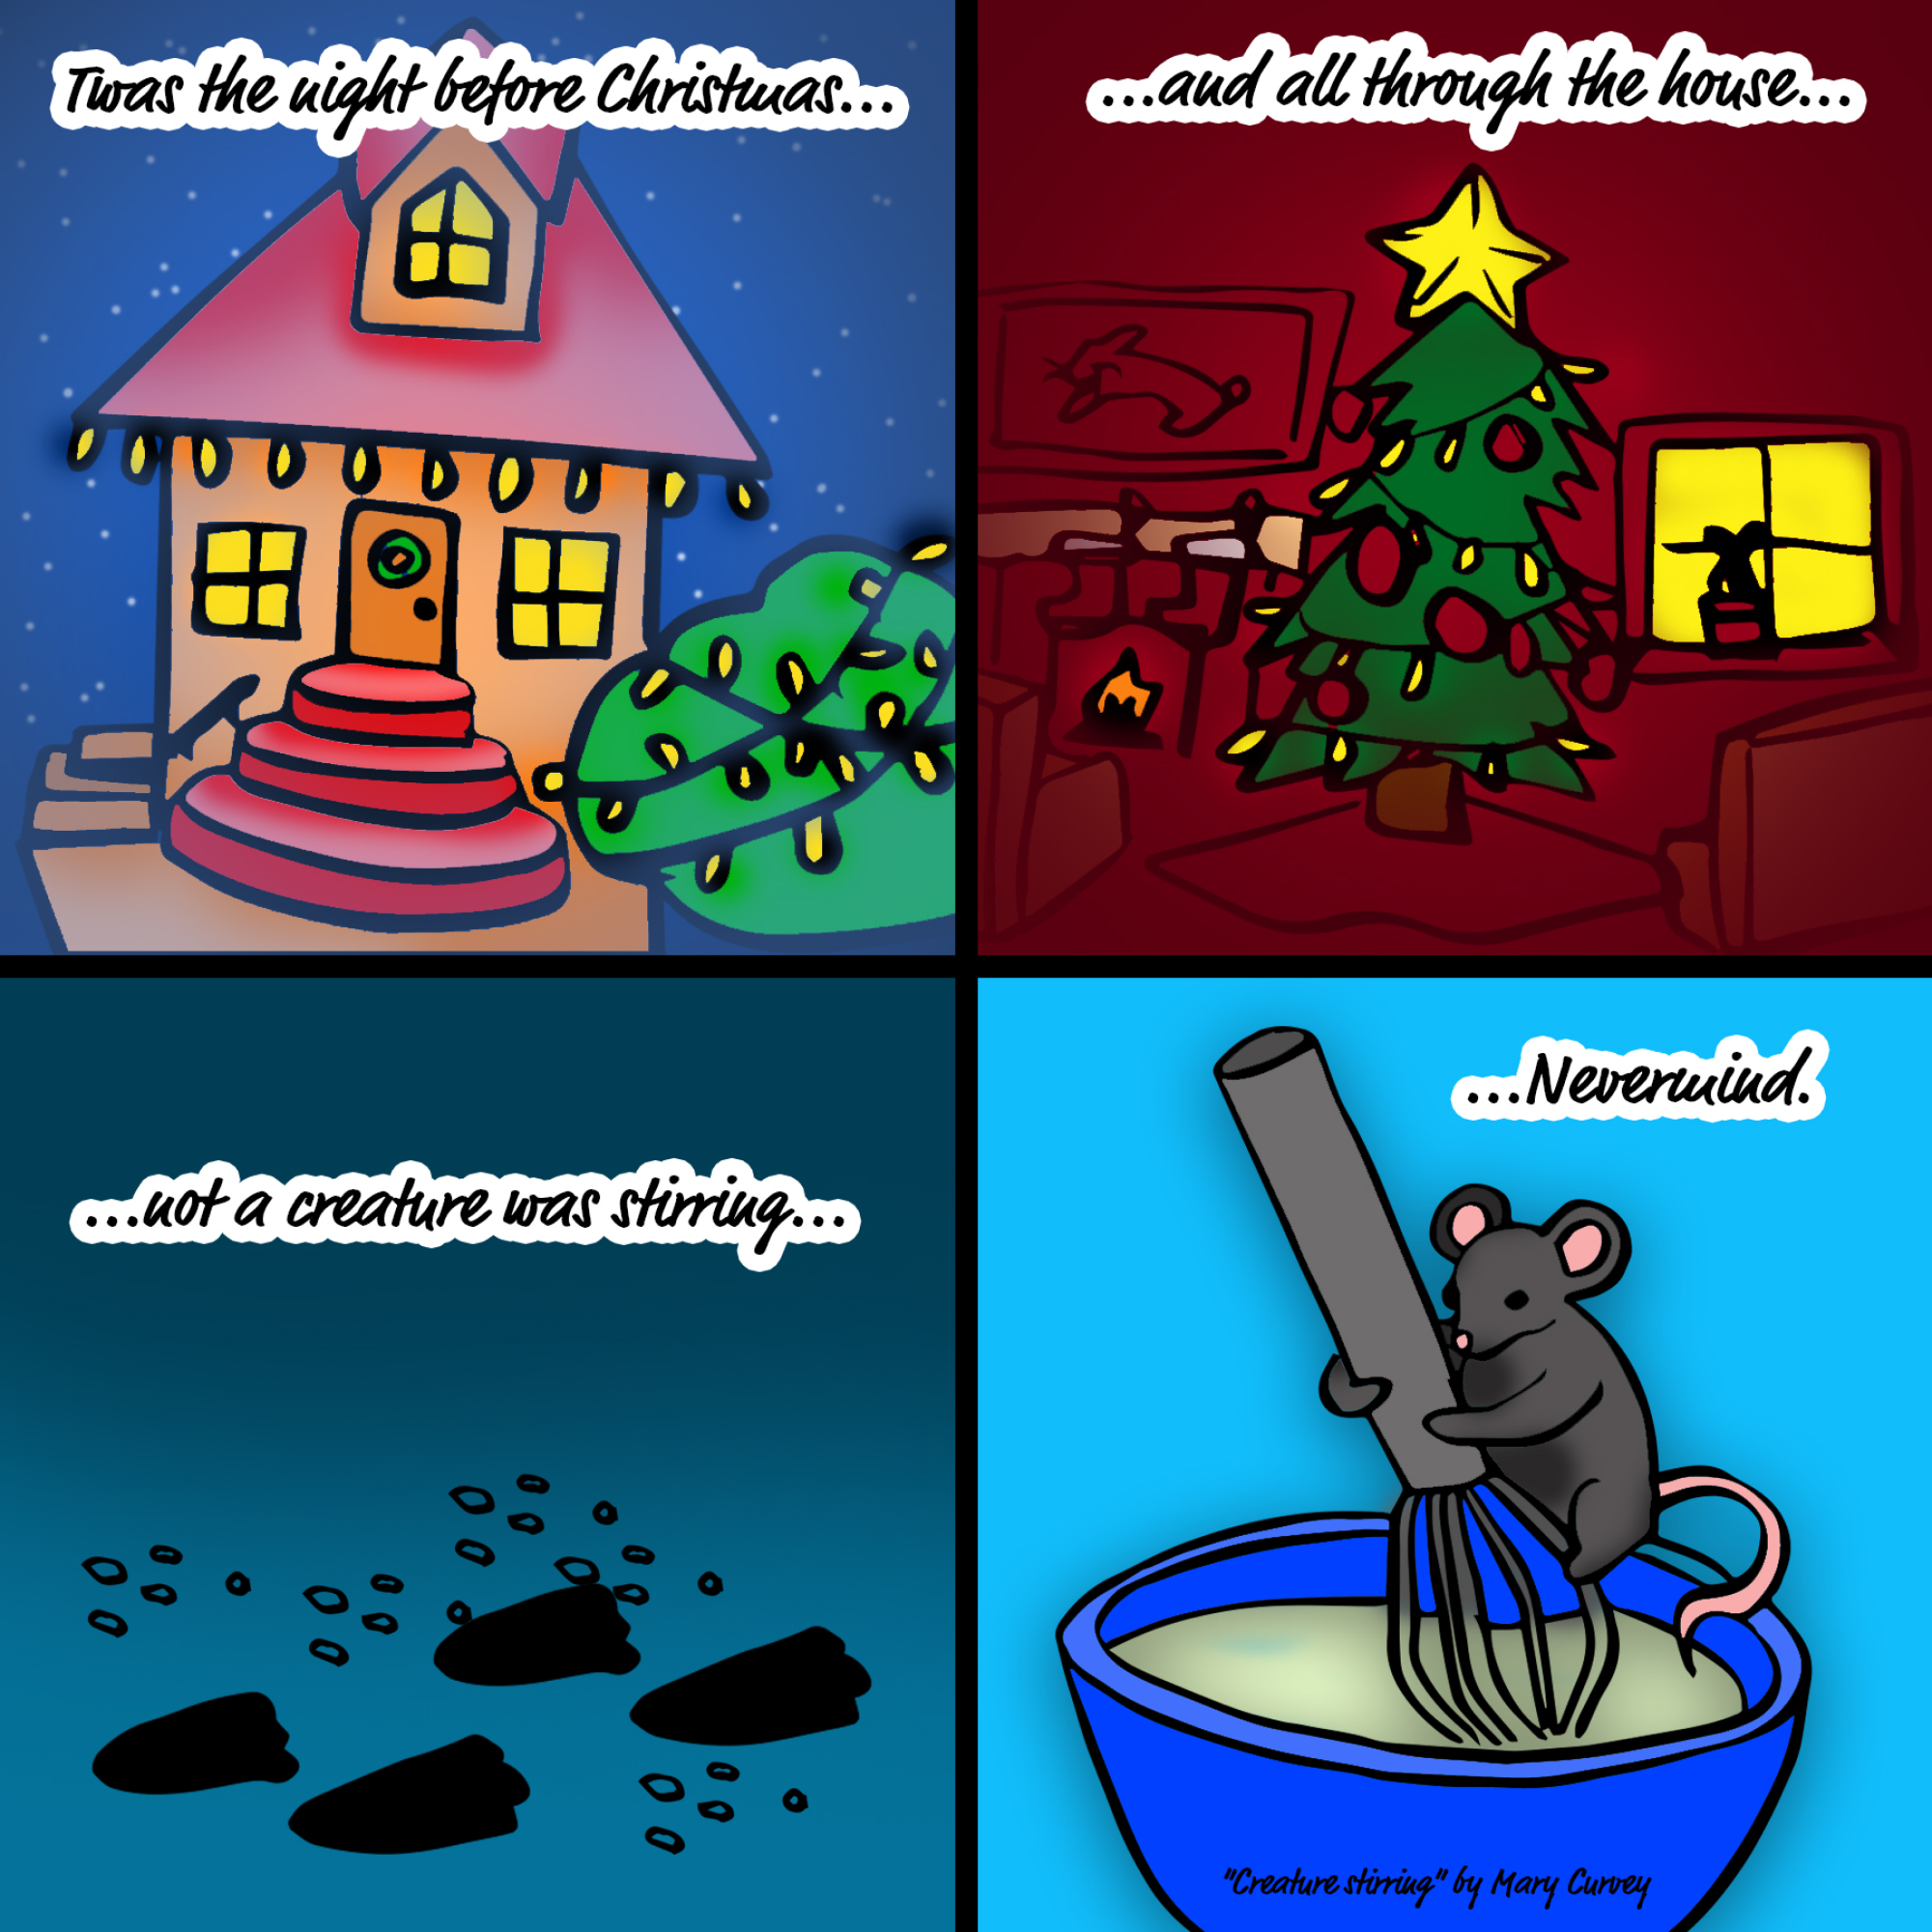 Comic of a mouse stirring on Christmas